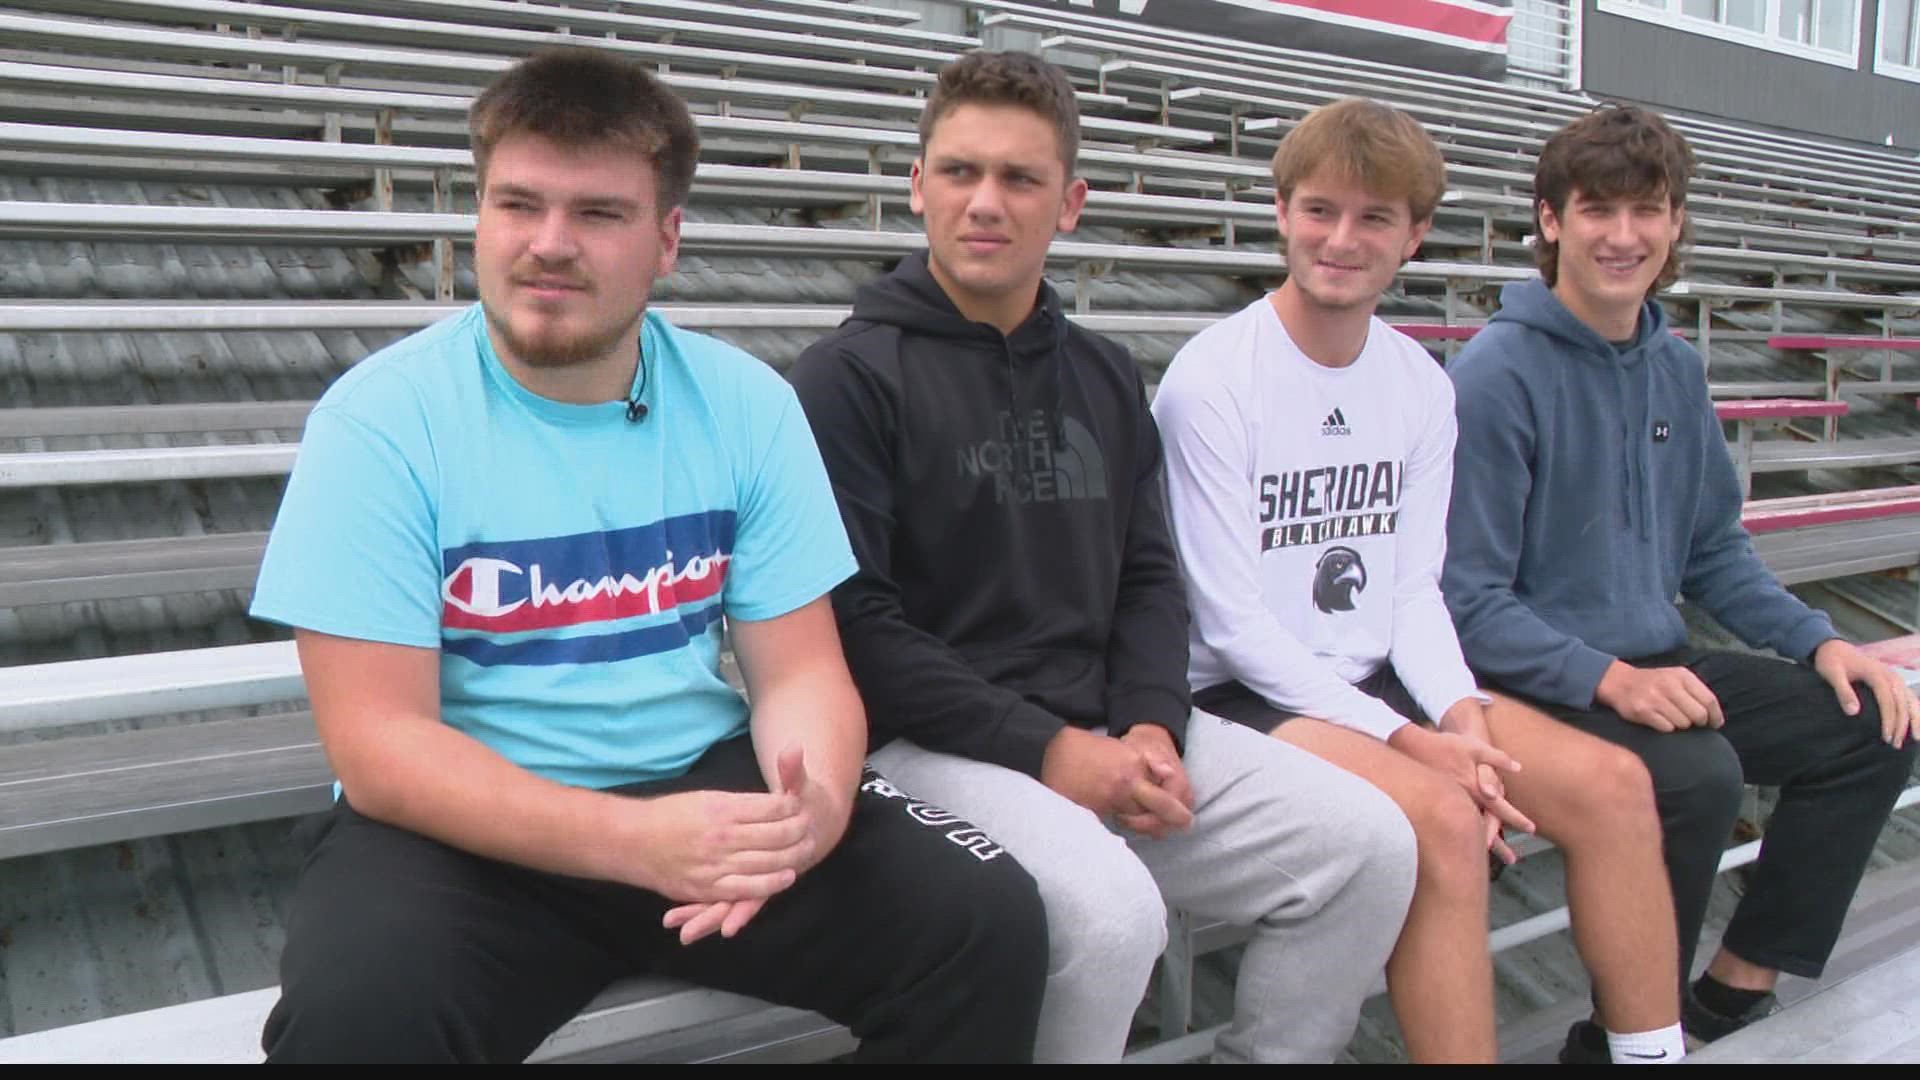 Four Sheridan students are raising money for the family of someone they've never met.